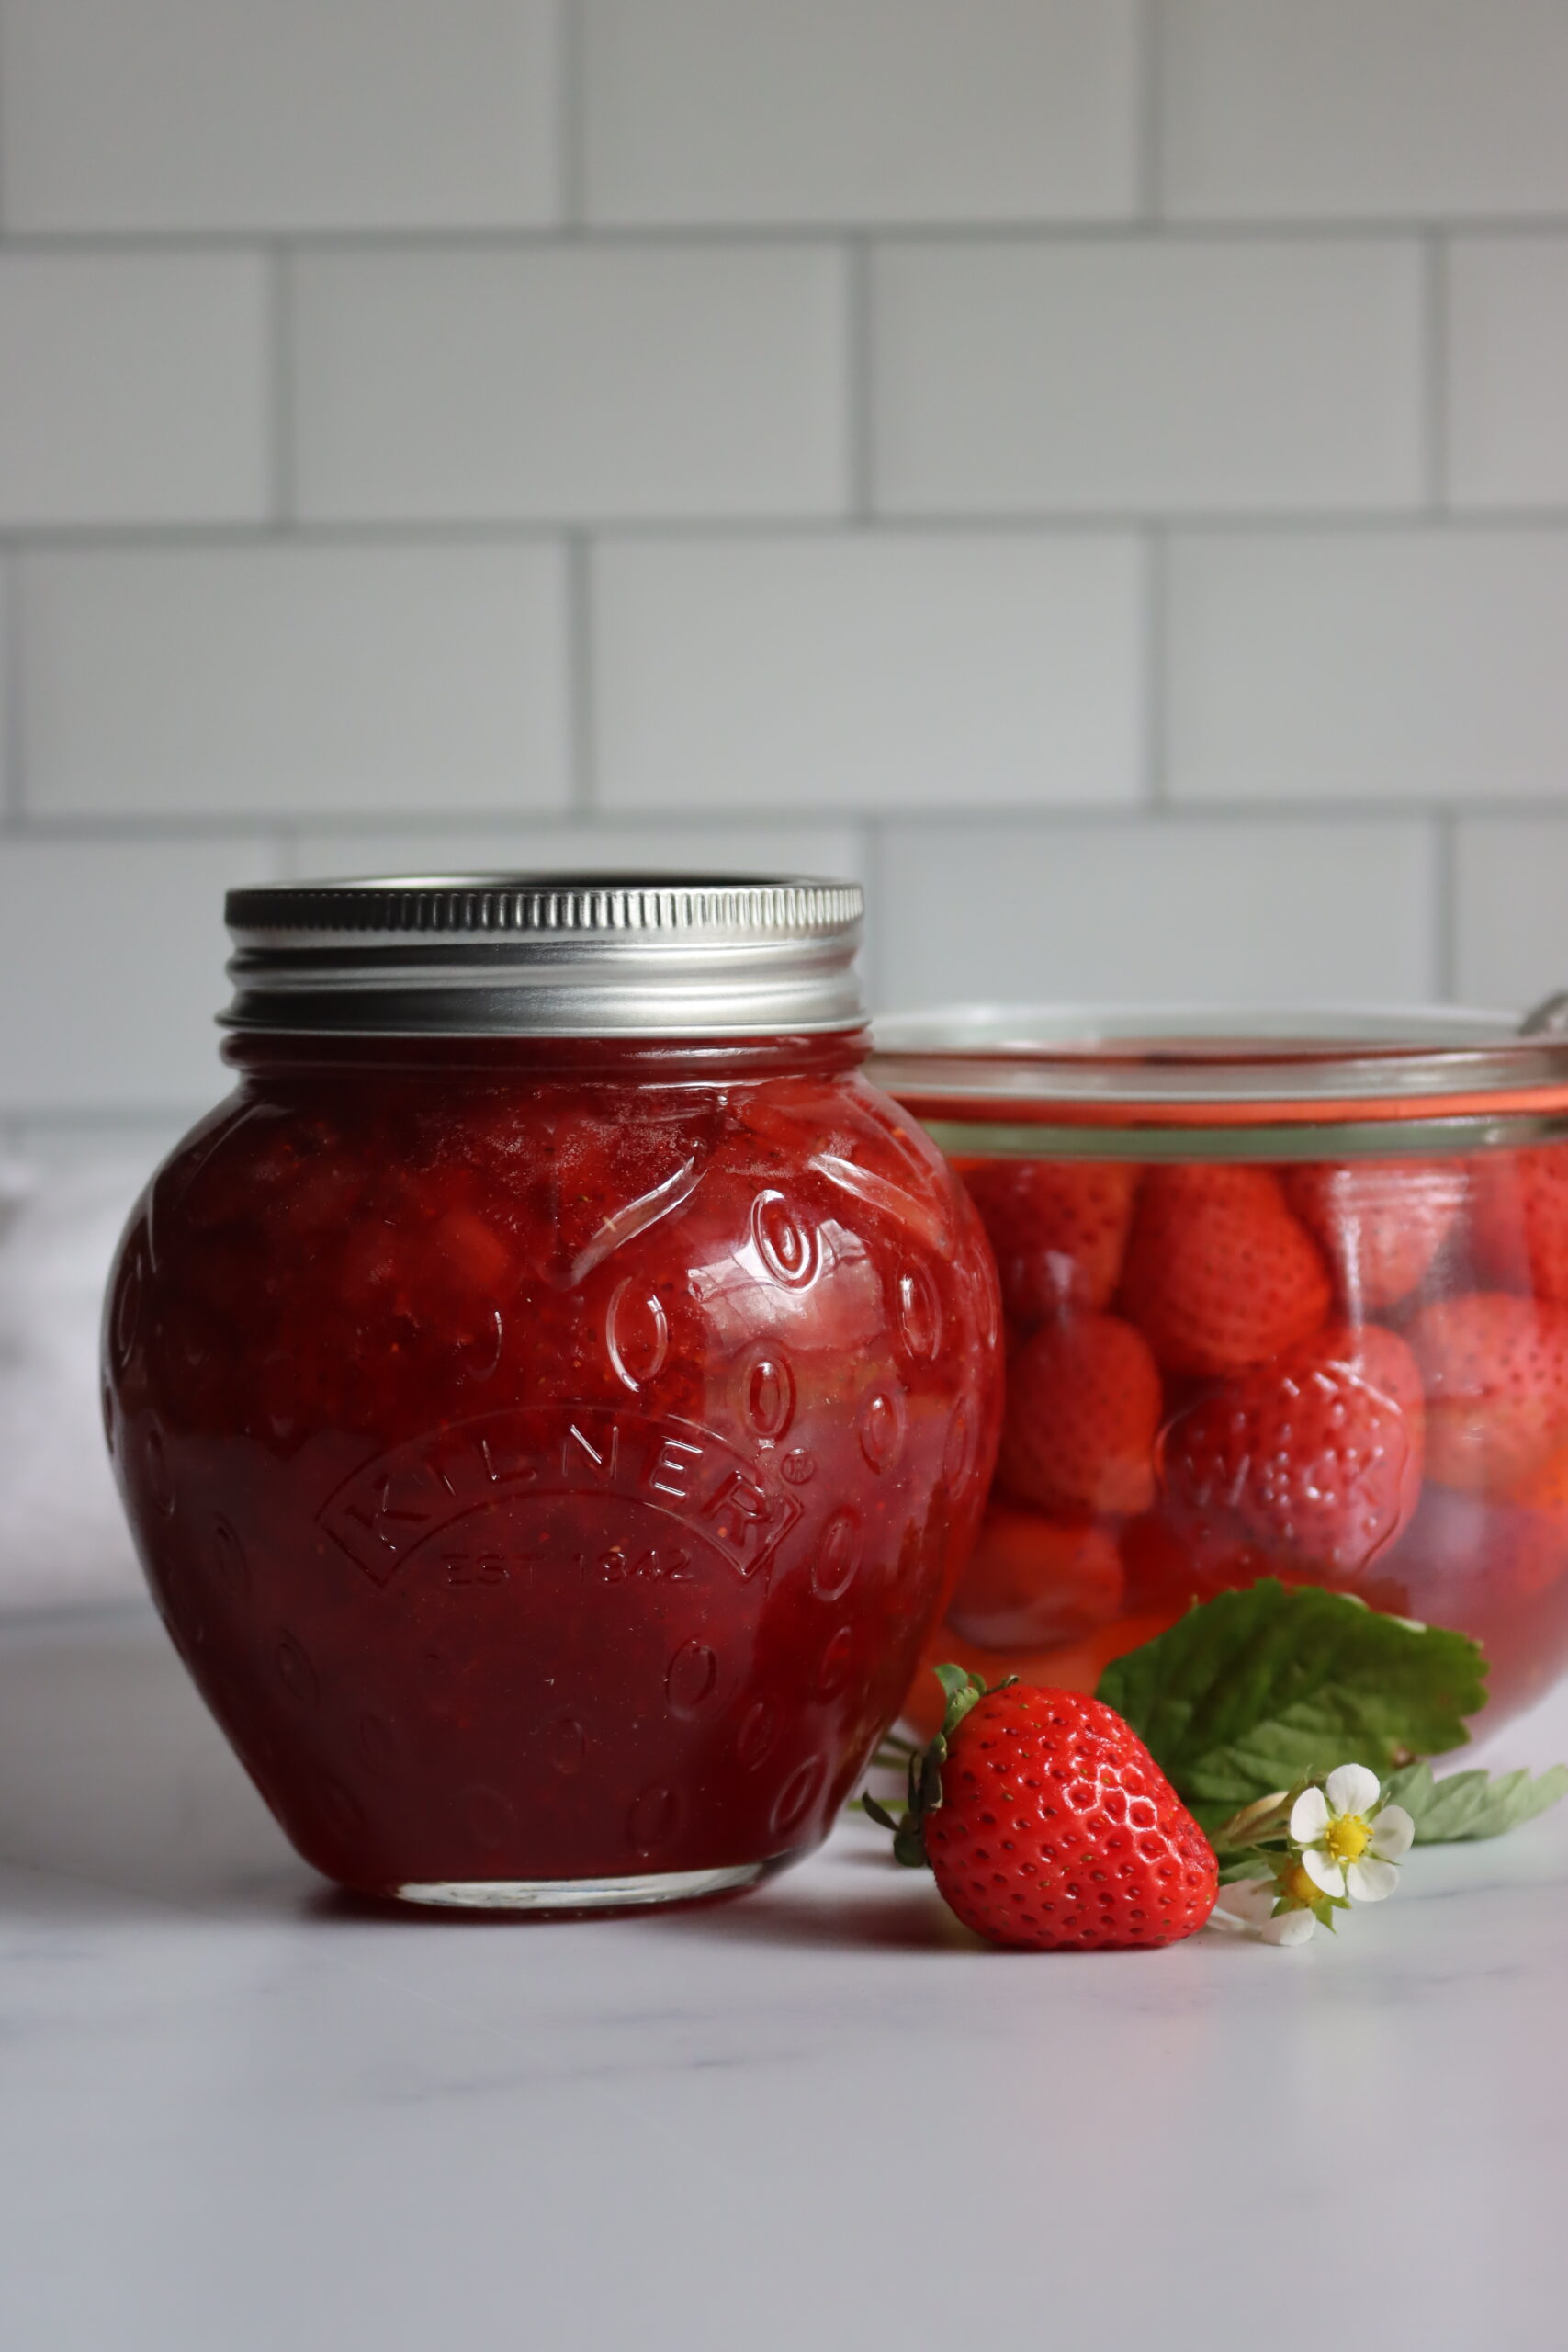 Strawberry Canning Recipes, including strawberry jam and pickled strawberries